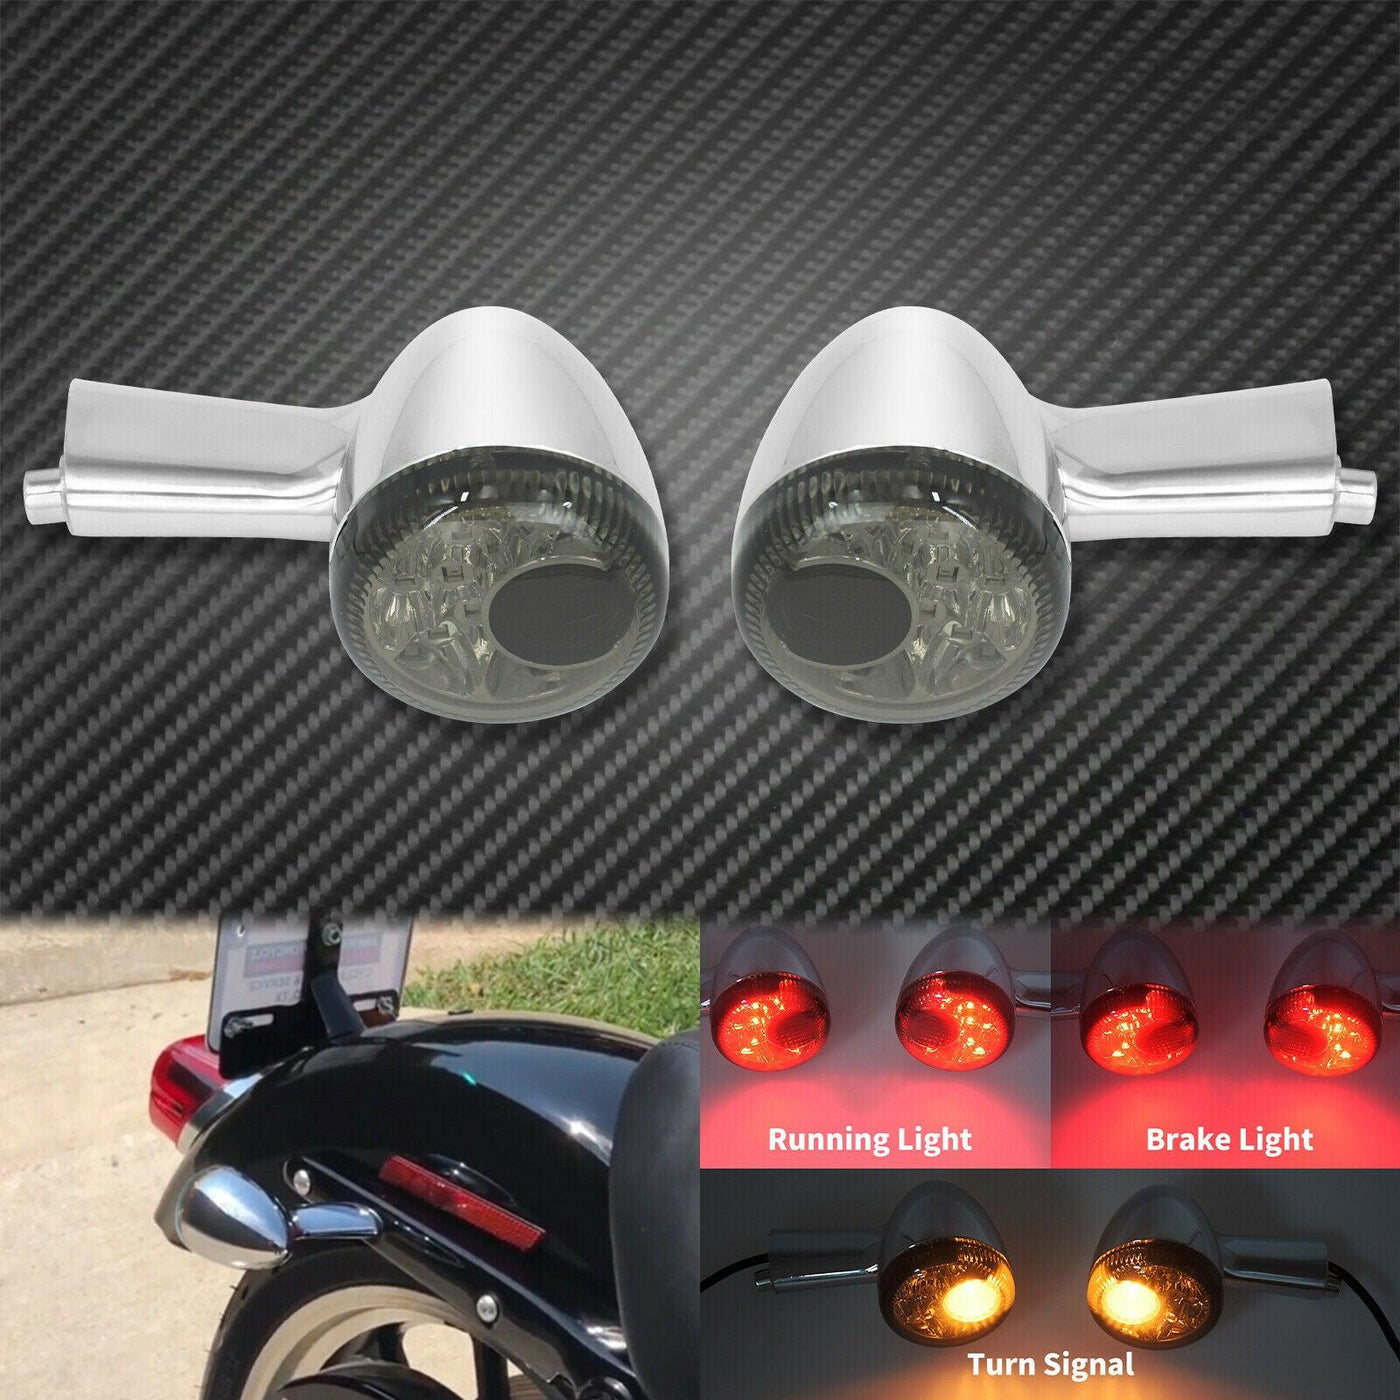 Chrome Rear Turn Signal LED Indicator Brake Light Fit For Sportster 1992-2021 - Moto Life Products